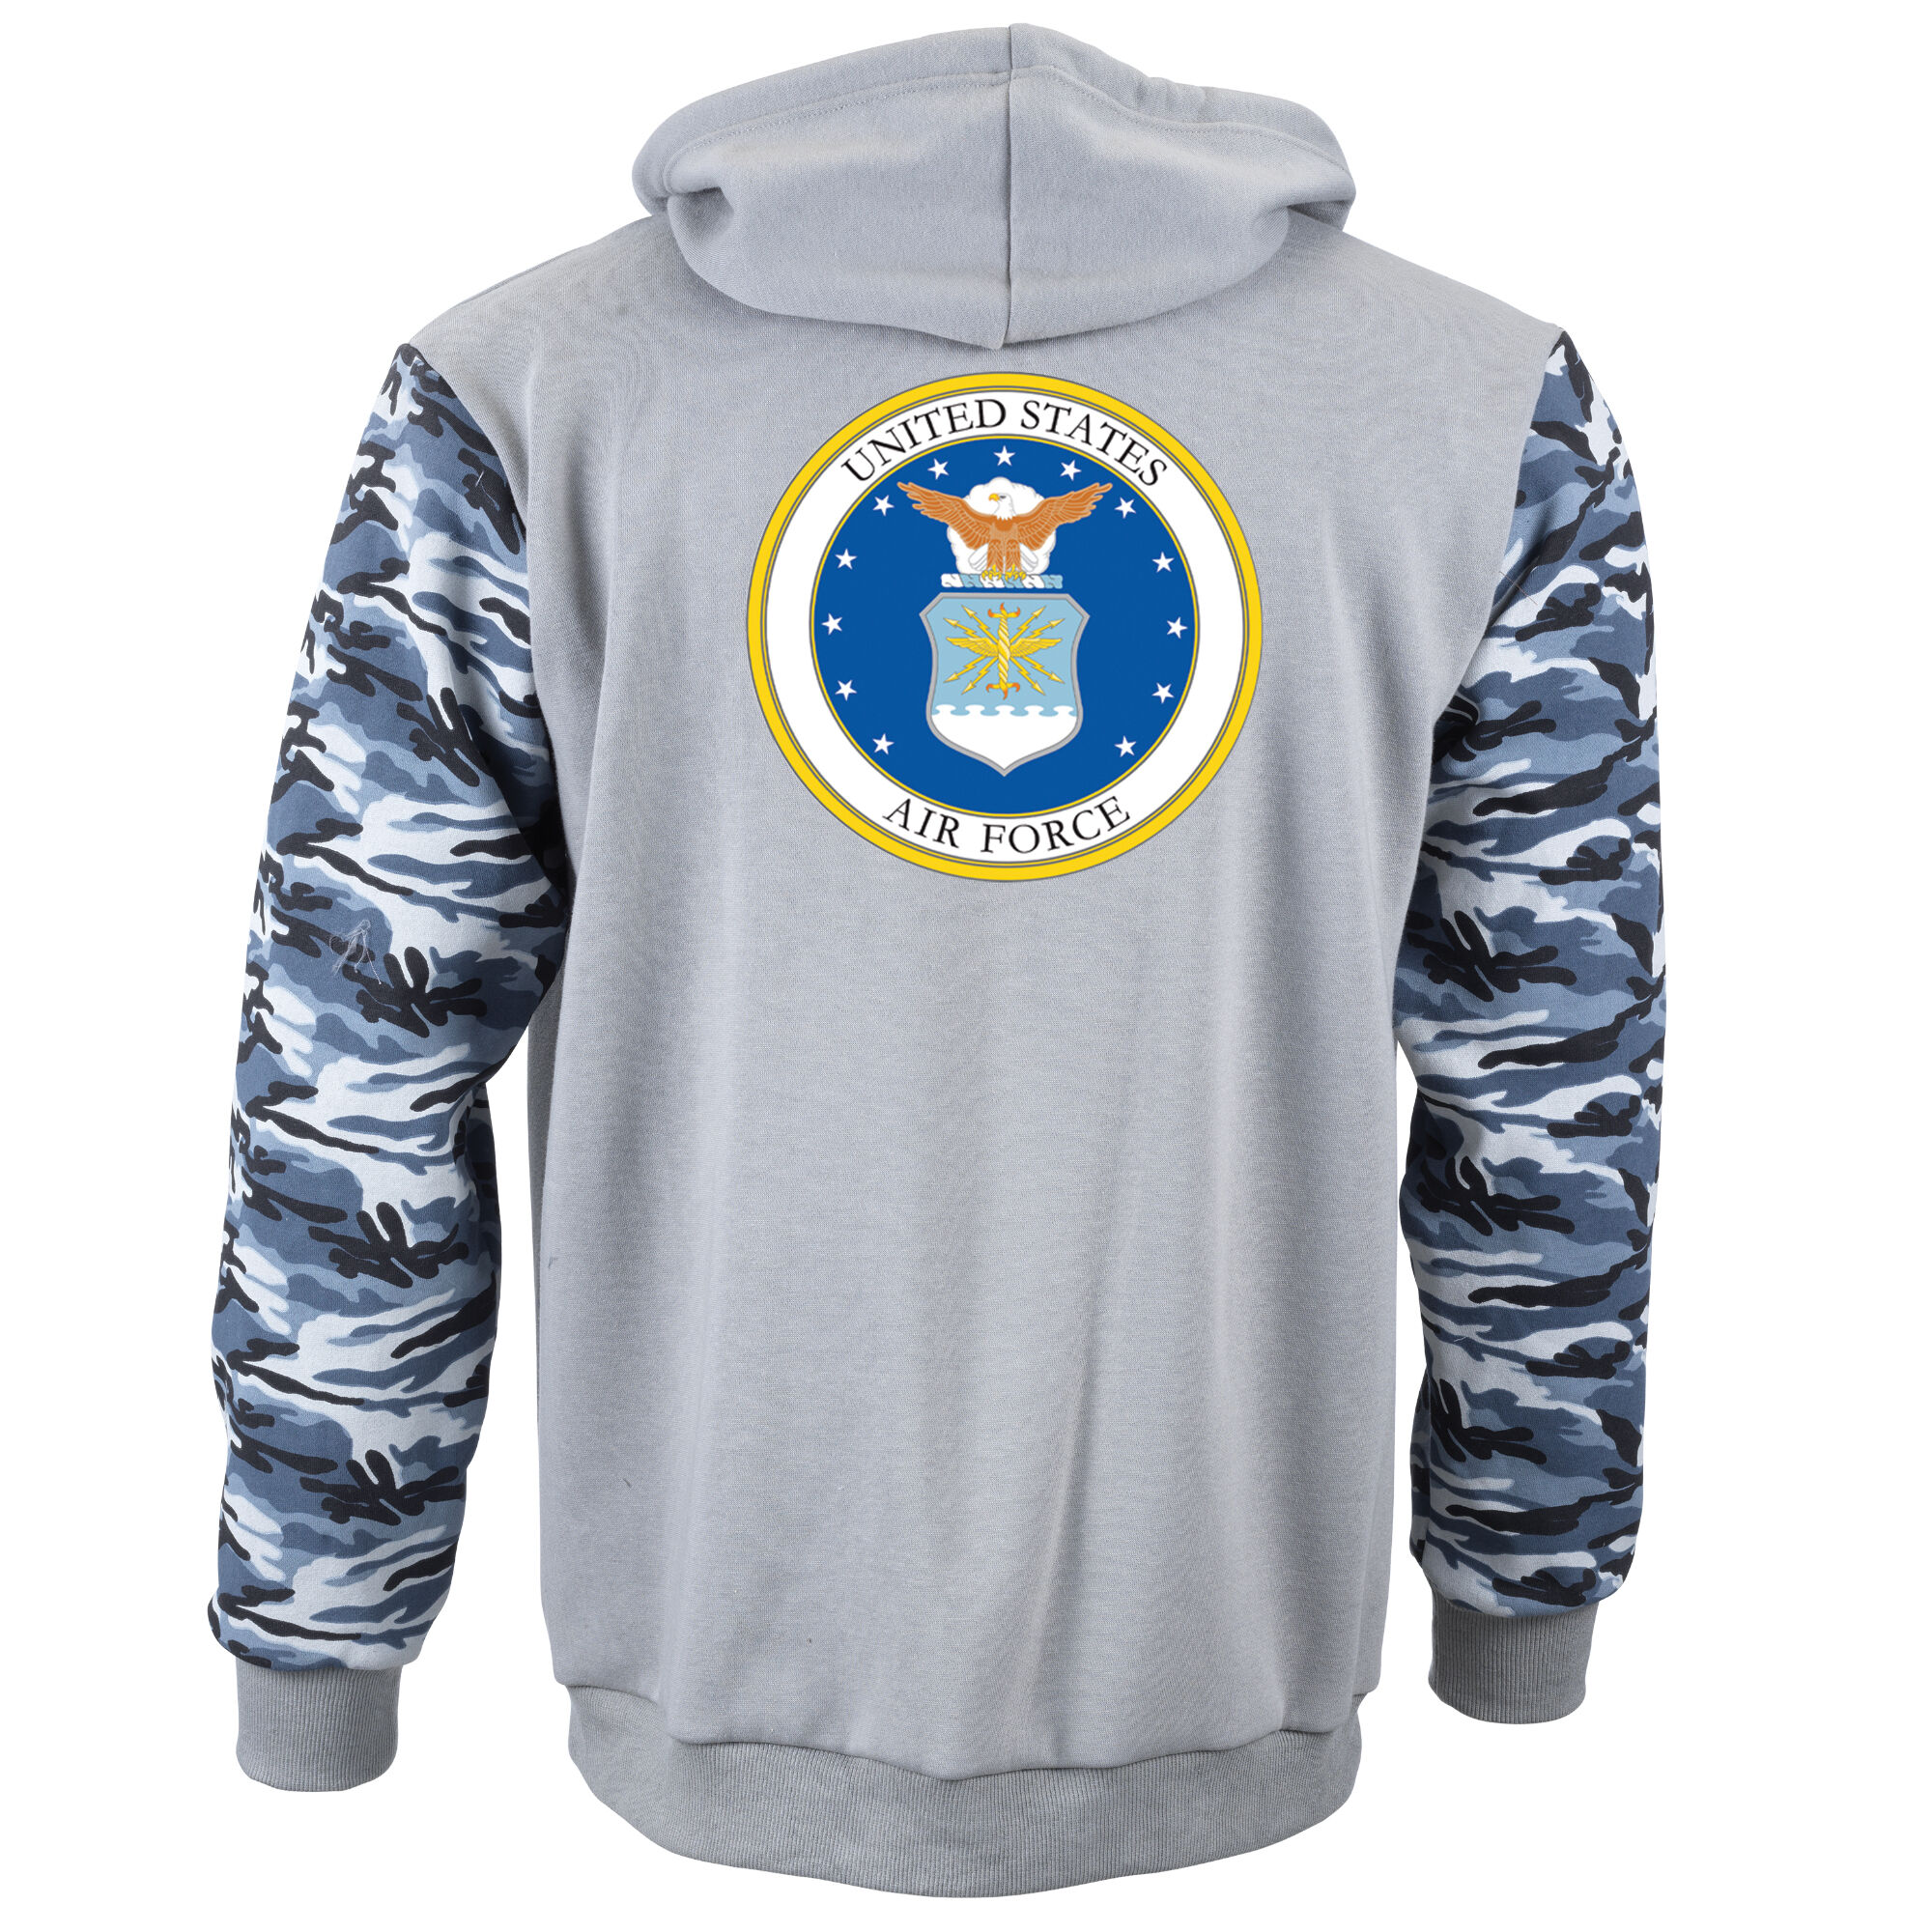 The Personalized US Air Force Hoodie 10117 0033 b back